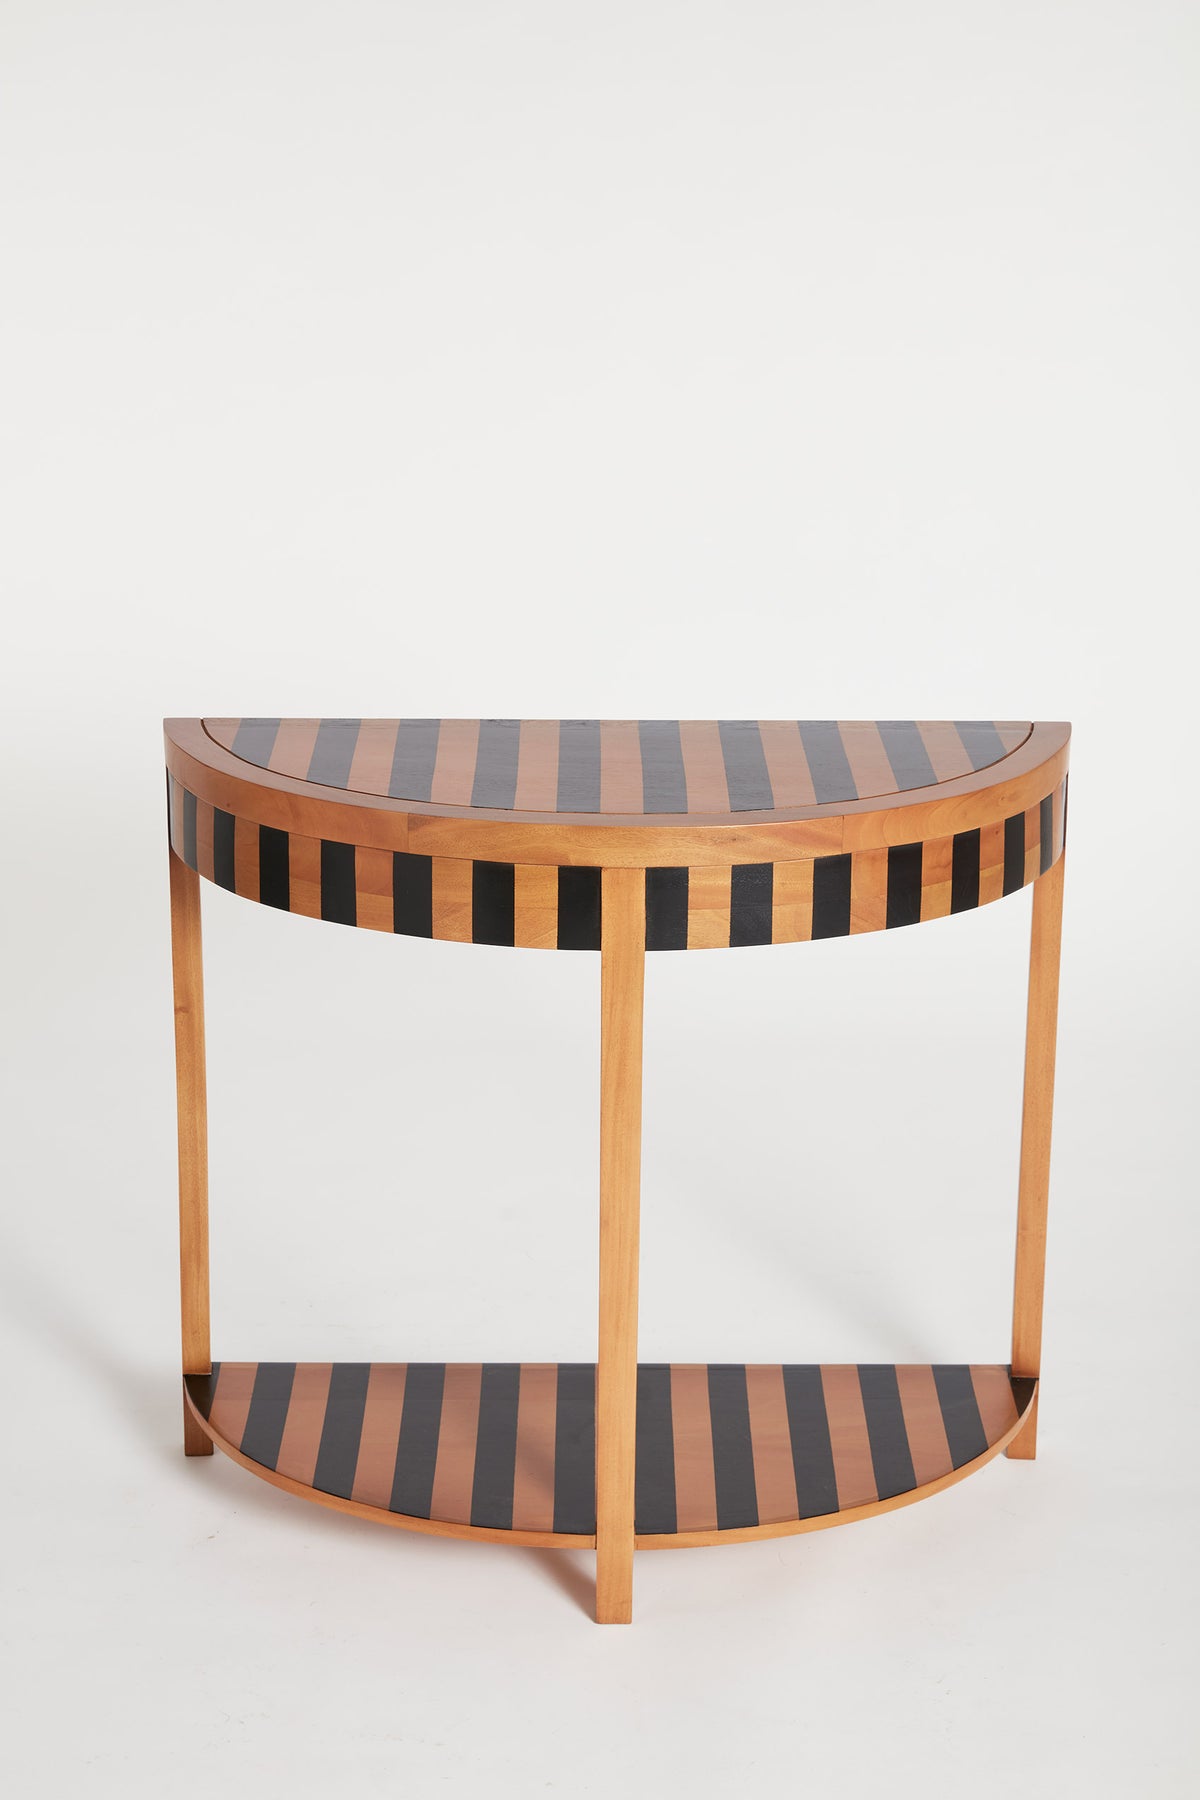 Timber console table in half moon shape with bold black stripes